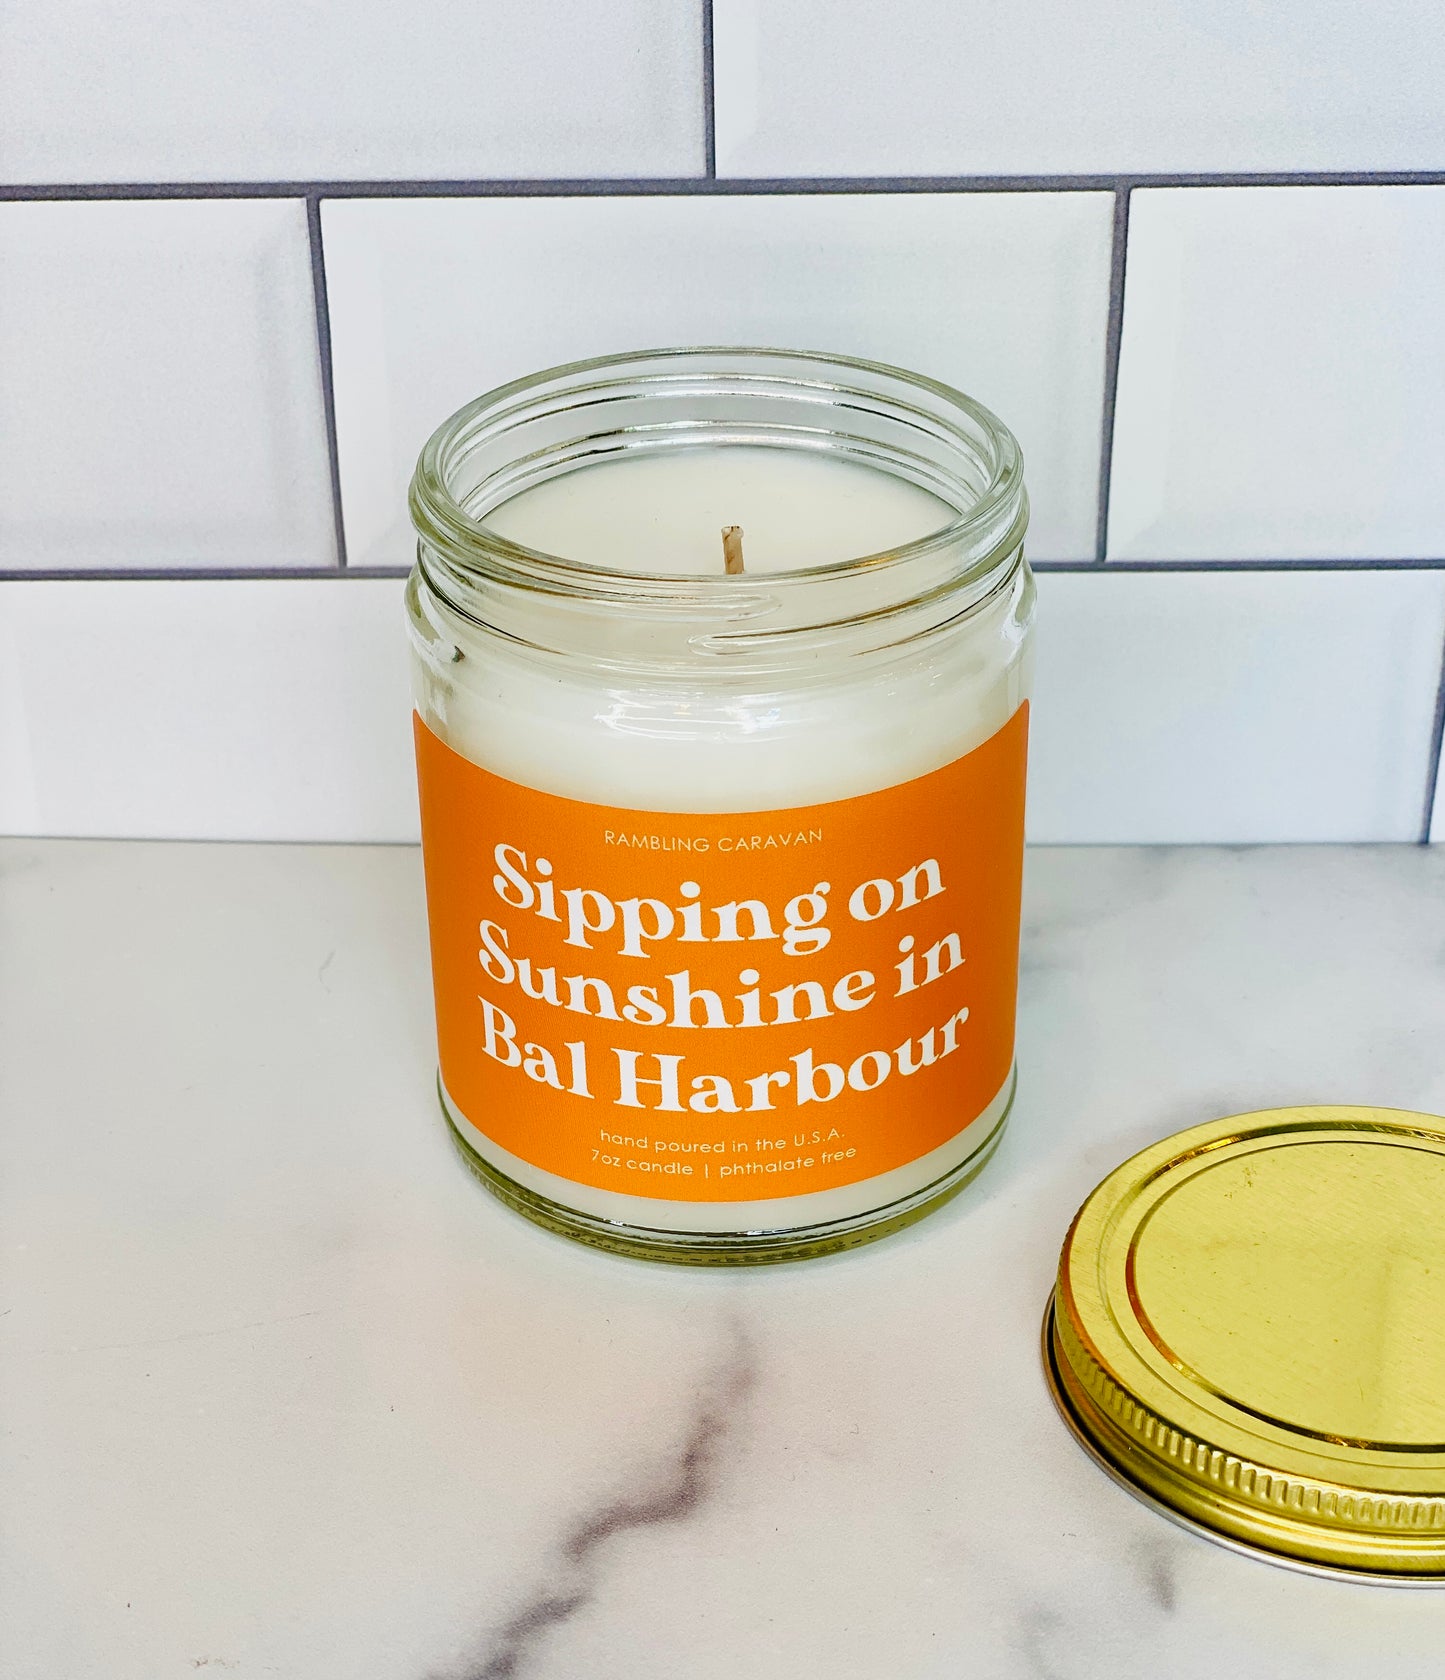 Sipping on Sunshine in Bal Harbour Candle